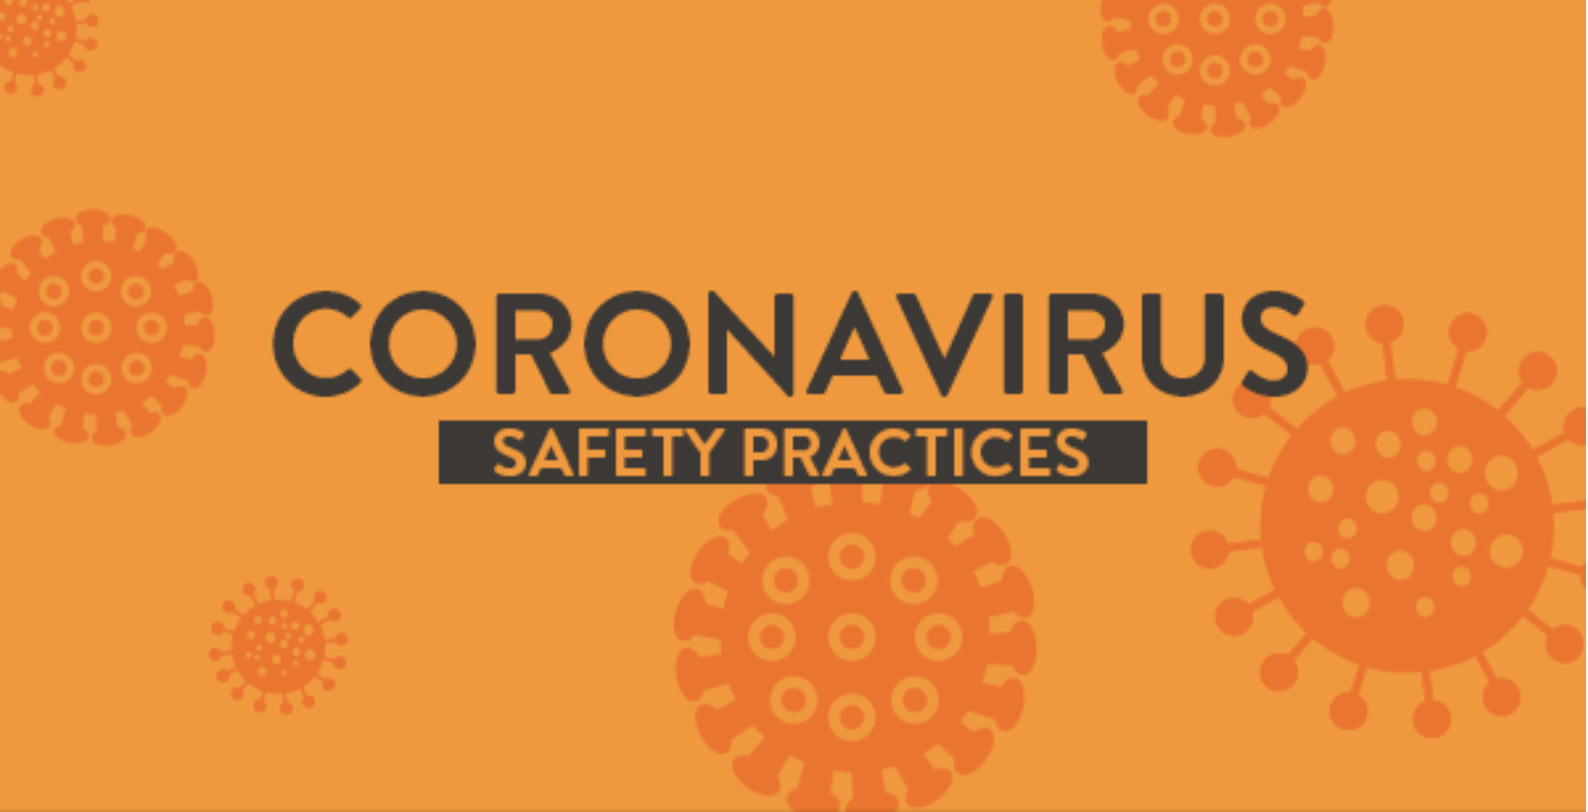 Health and Safety Protocols during the Coronavirus Pandemic